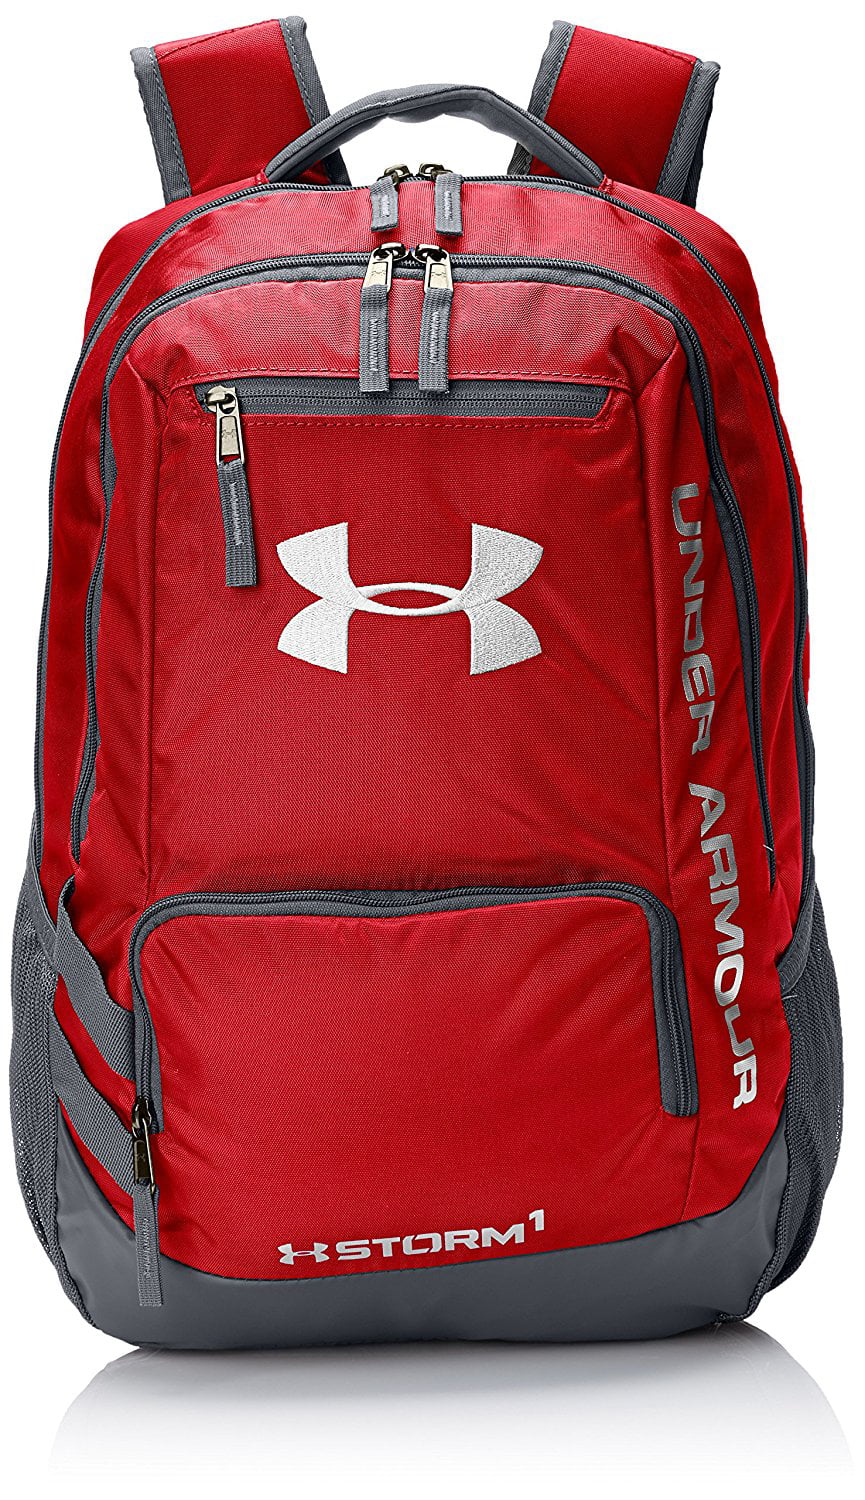 Under Armour Hustle II Storm Laptop Backpack Red -